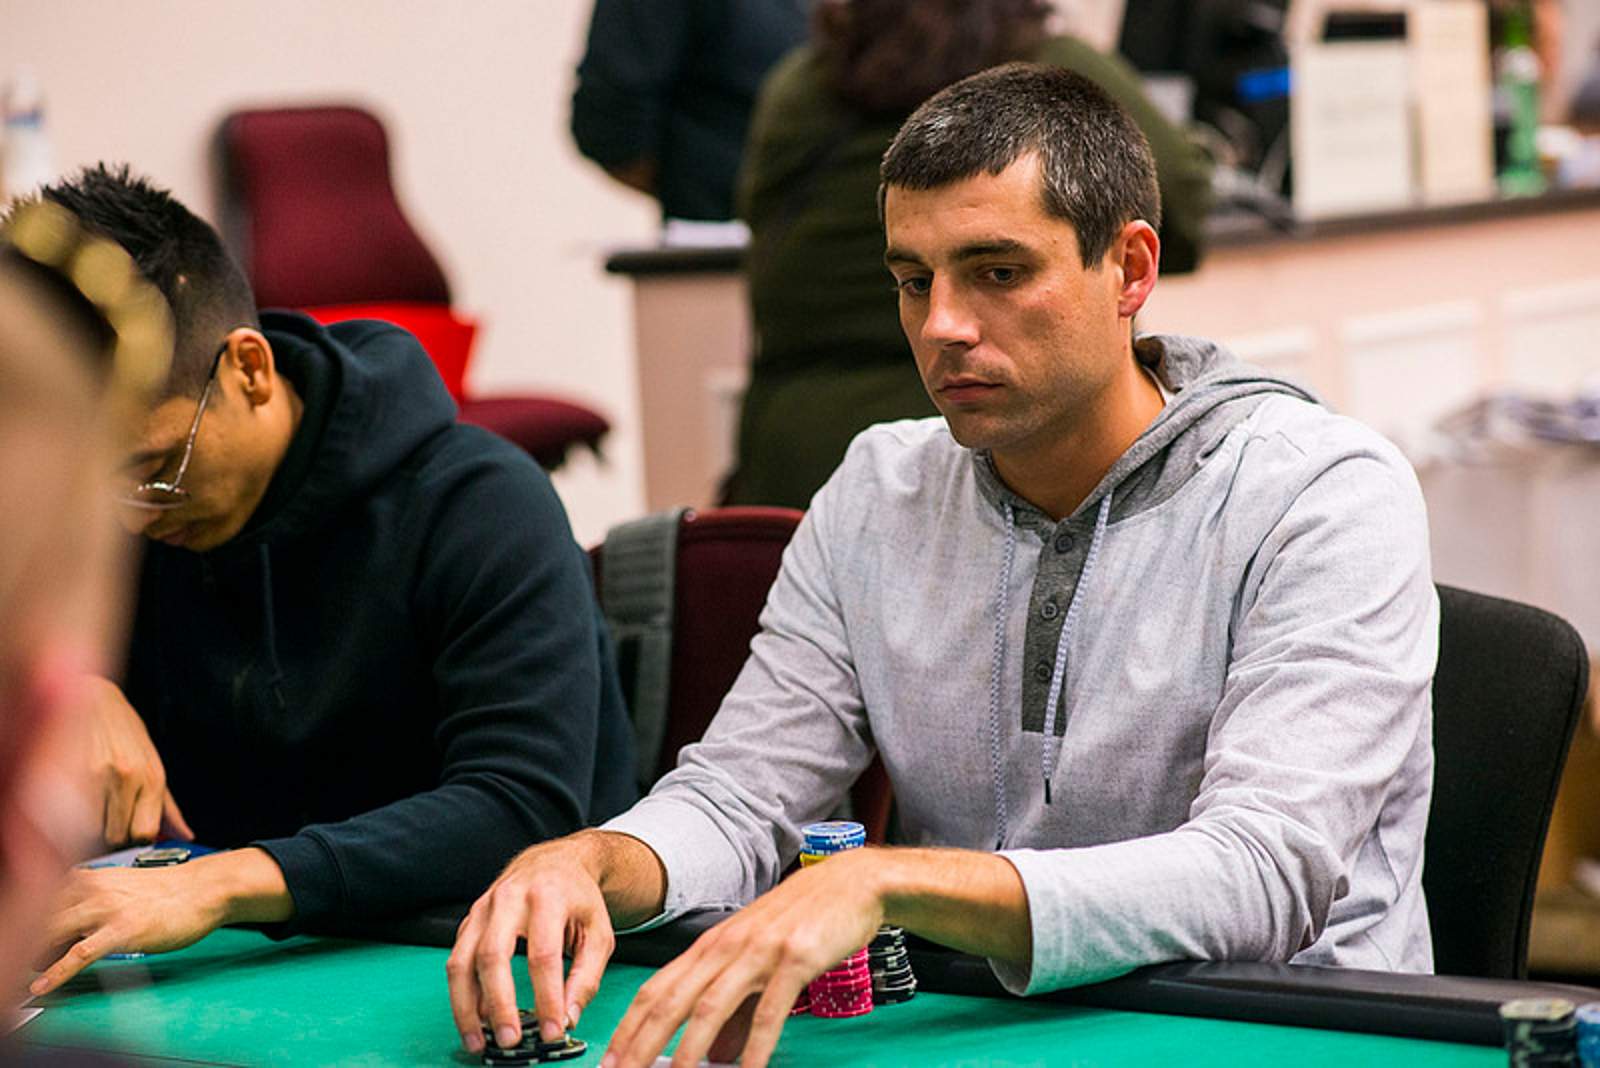 Graner Tops Day 1B, Leads Record Breaking Bay 101 Field